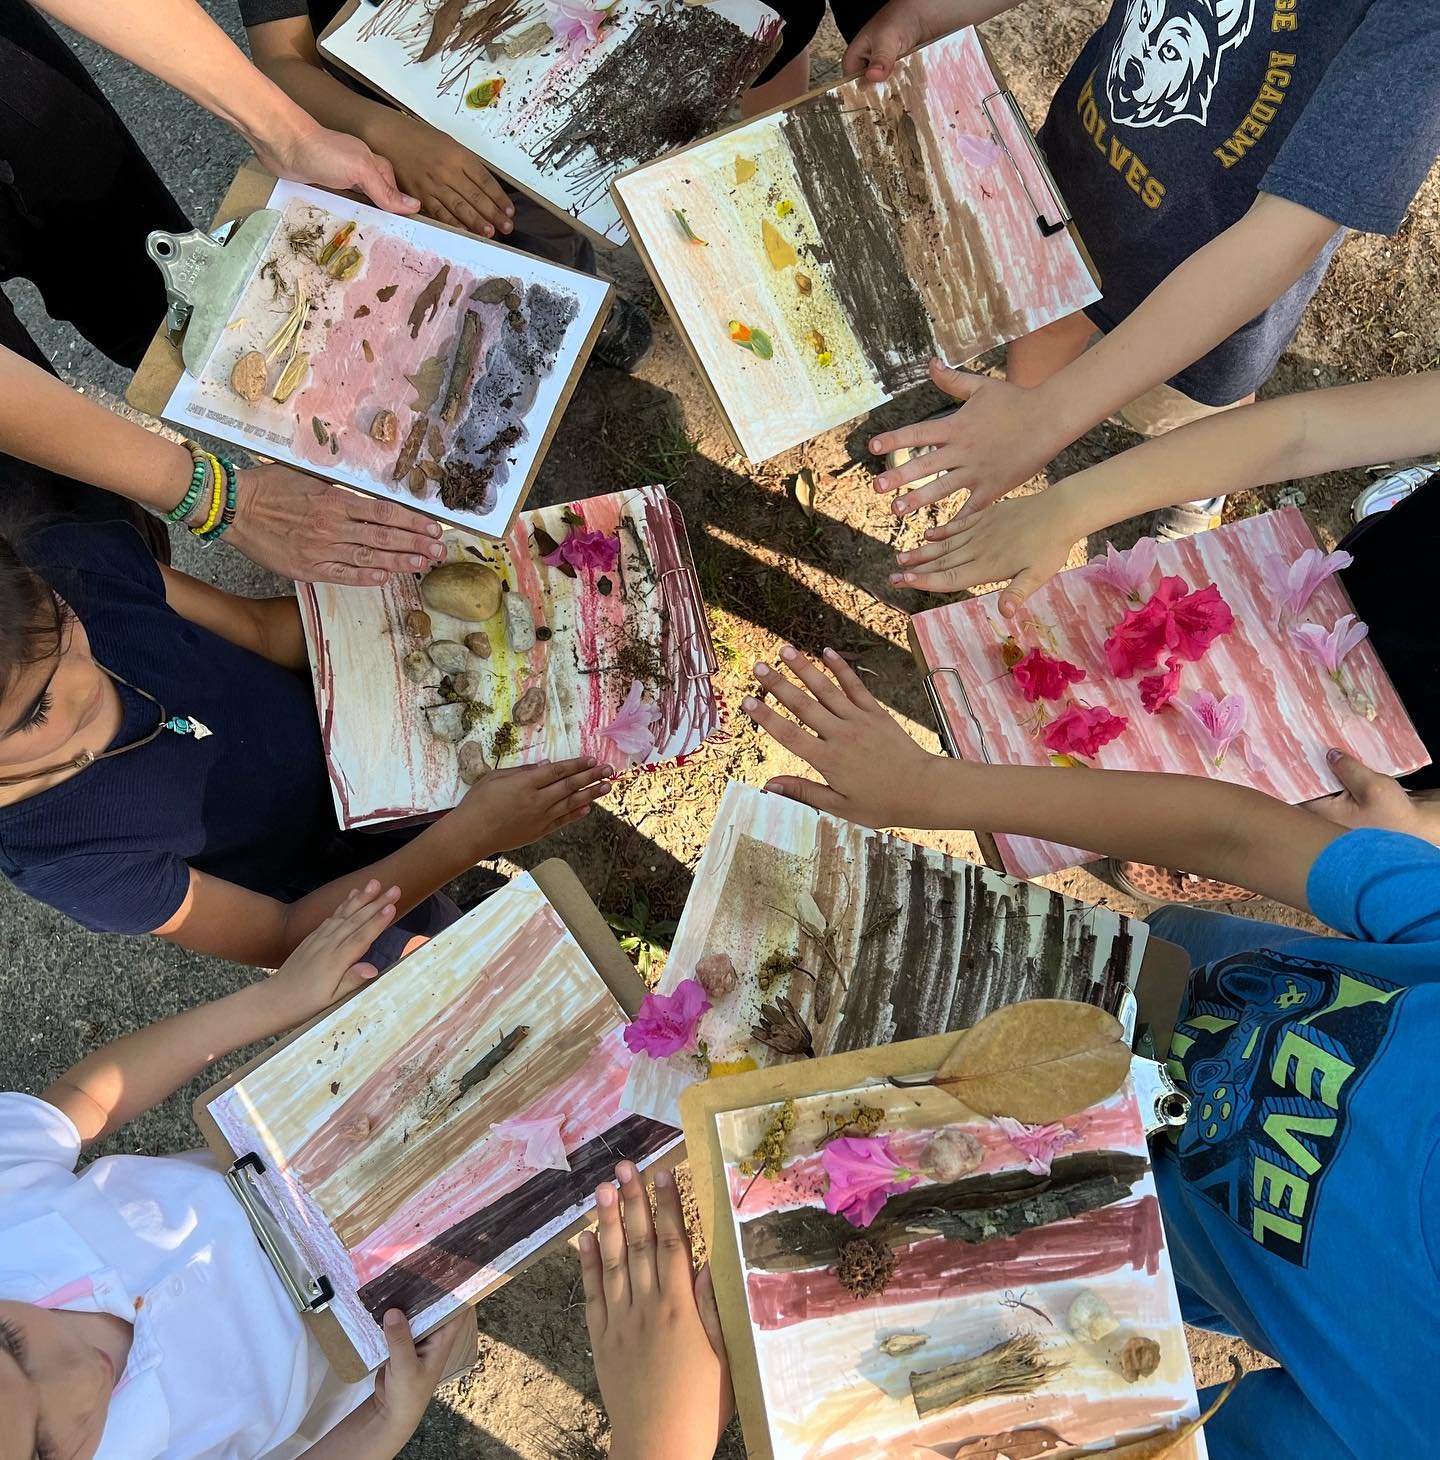 Firefly outside had a great week! We caught bugs and sketched them (there are some award winning sketches in the hallway you may want to check out)! We had eco club with kinship plot and learned facts about melanin and made &ldquo;hues of us&rdquo; r